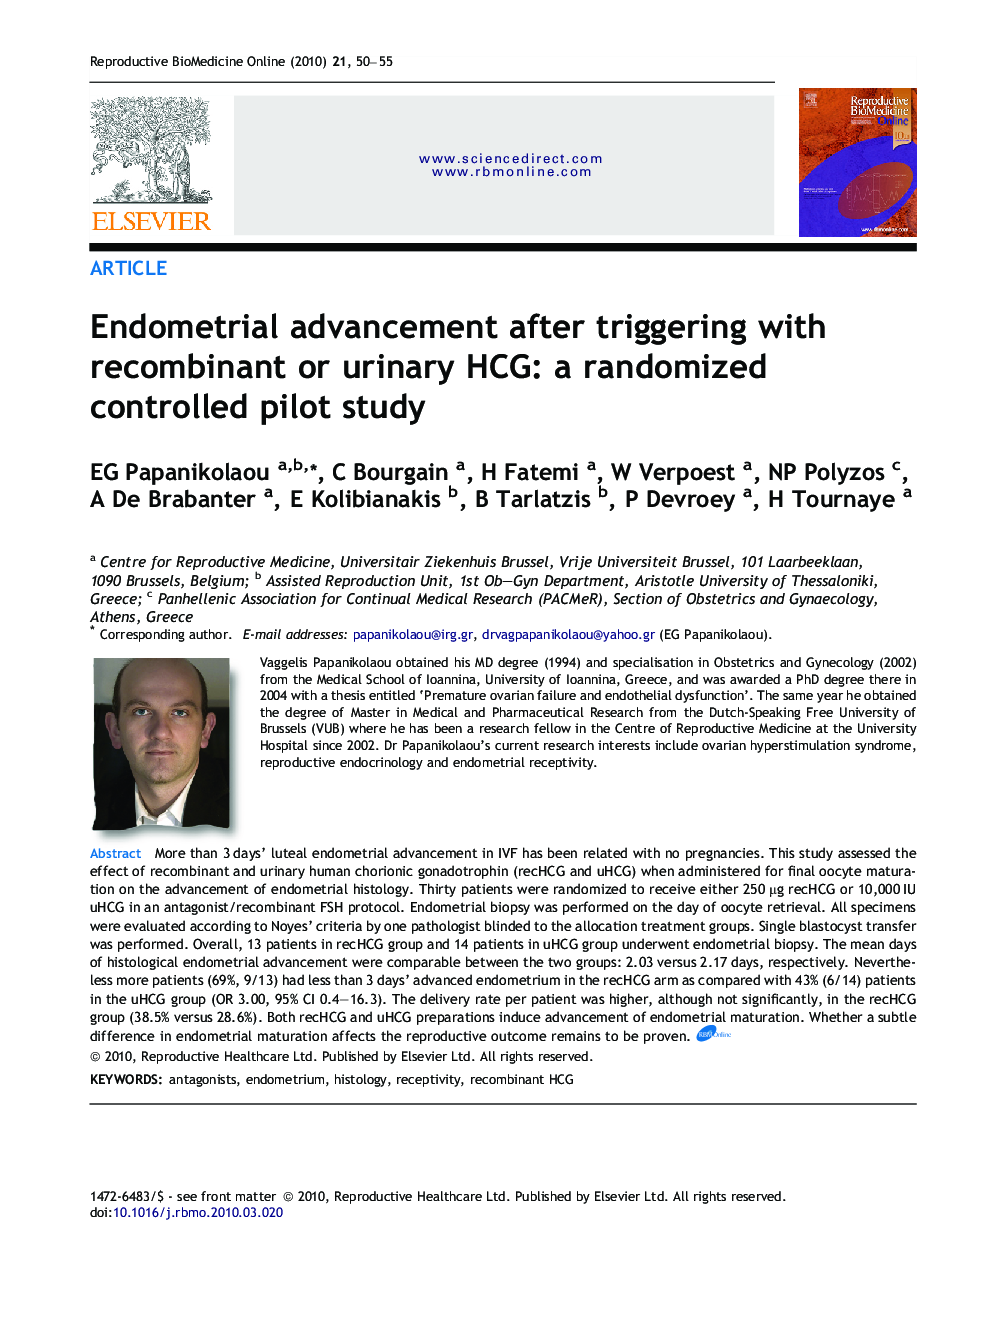 Endometrial advancement after triggering with recombinant or urinary HCG: a randomized controlled pilot study 